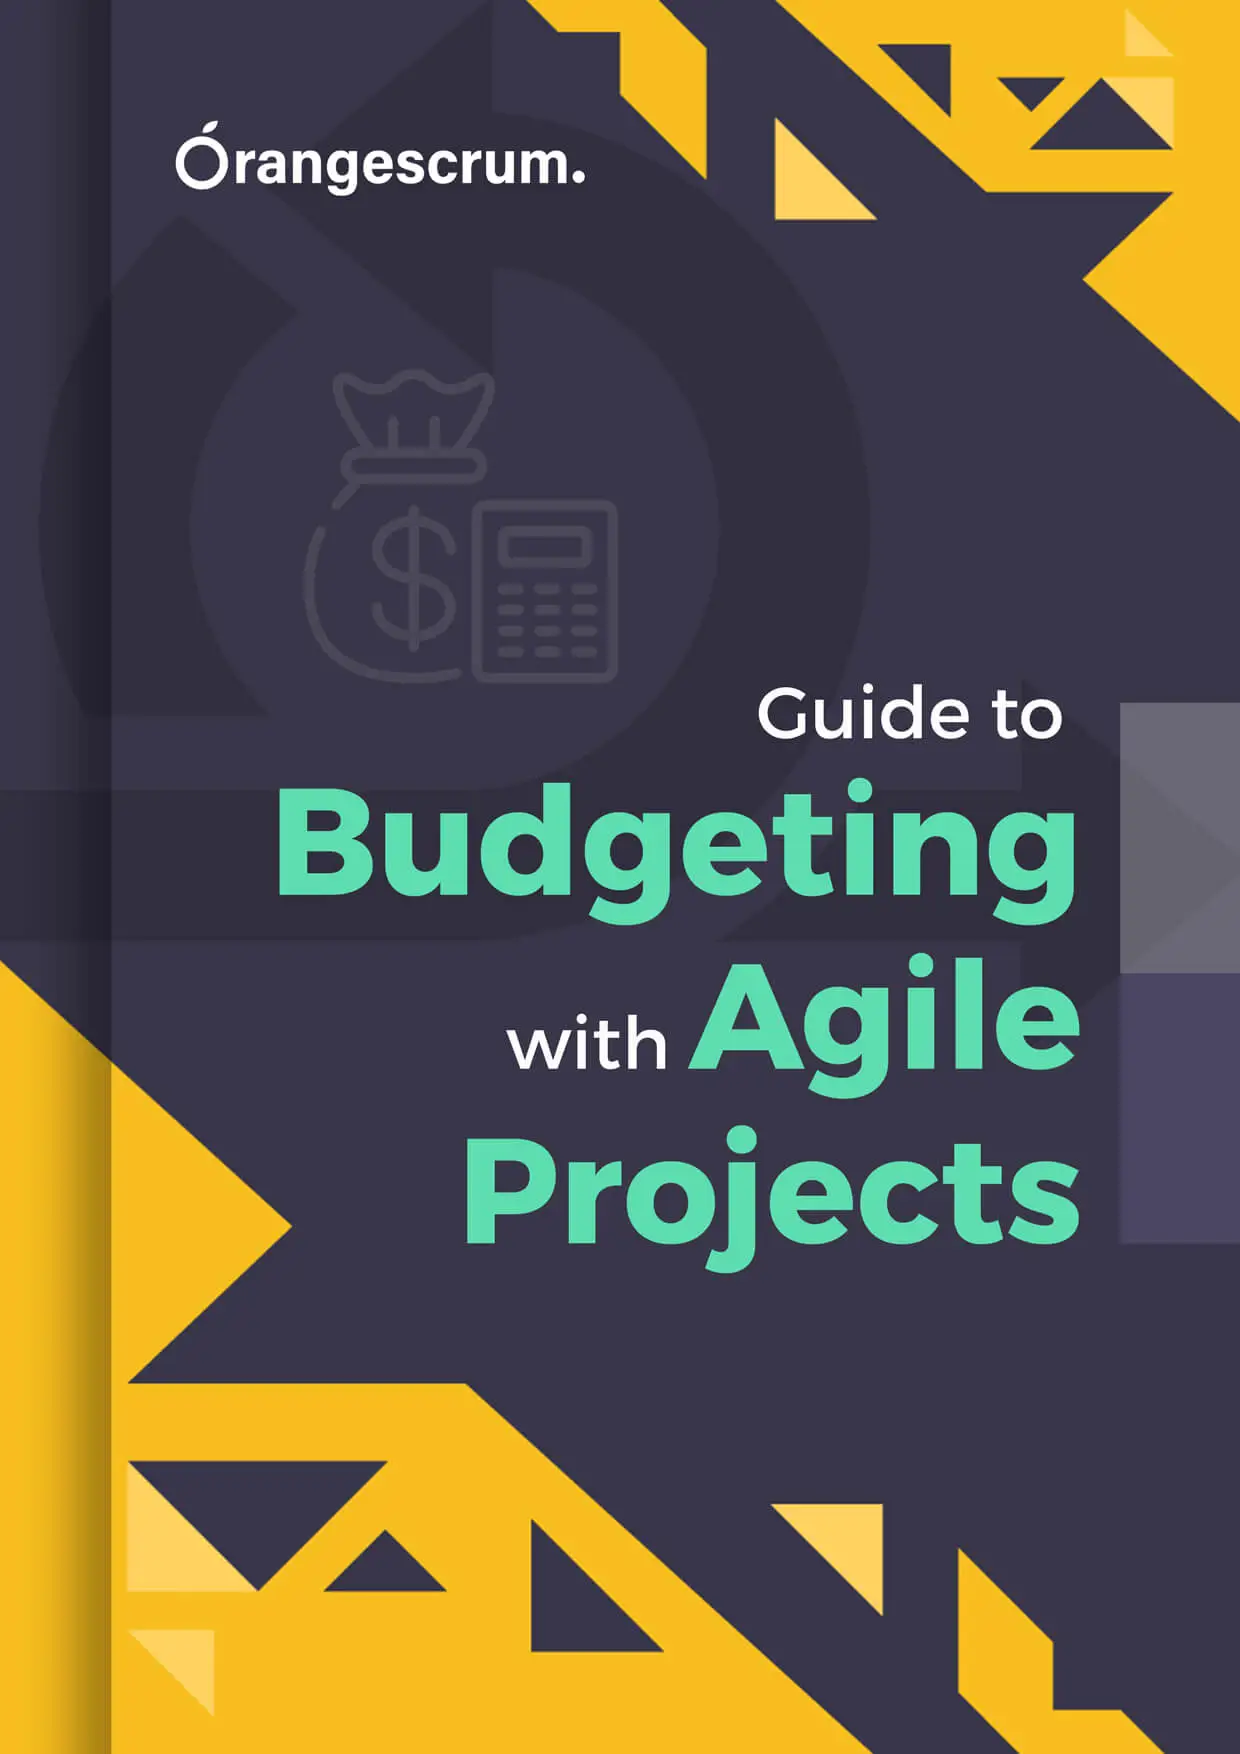 A Guide to Budgeting with Agile Projects